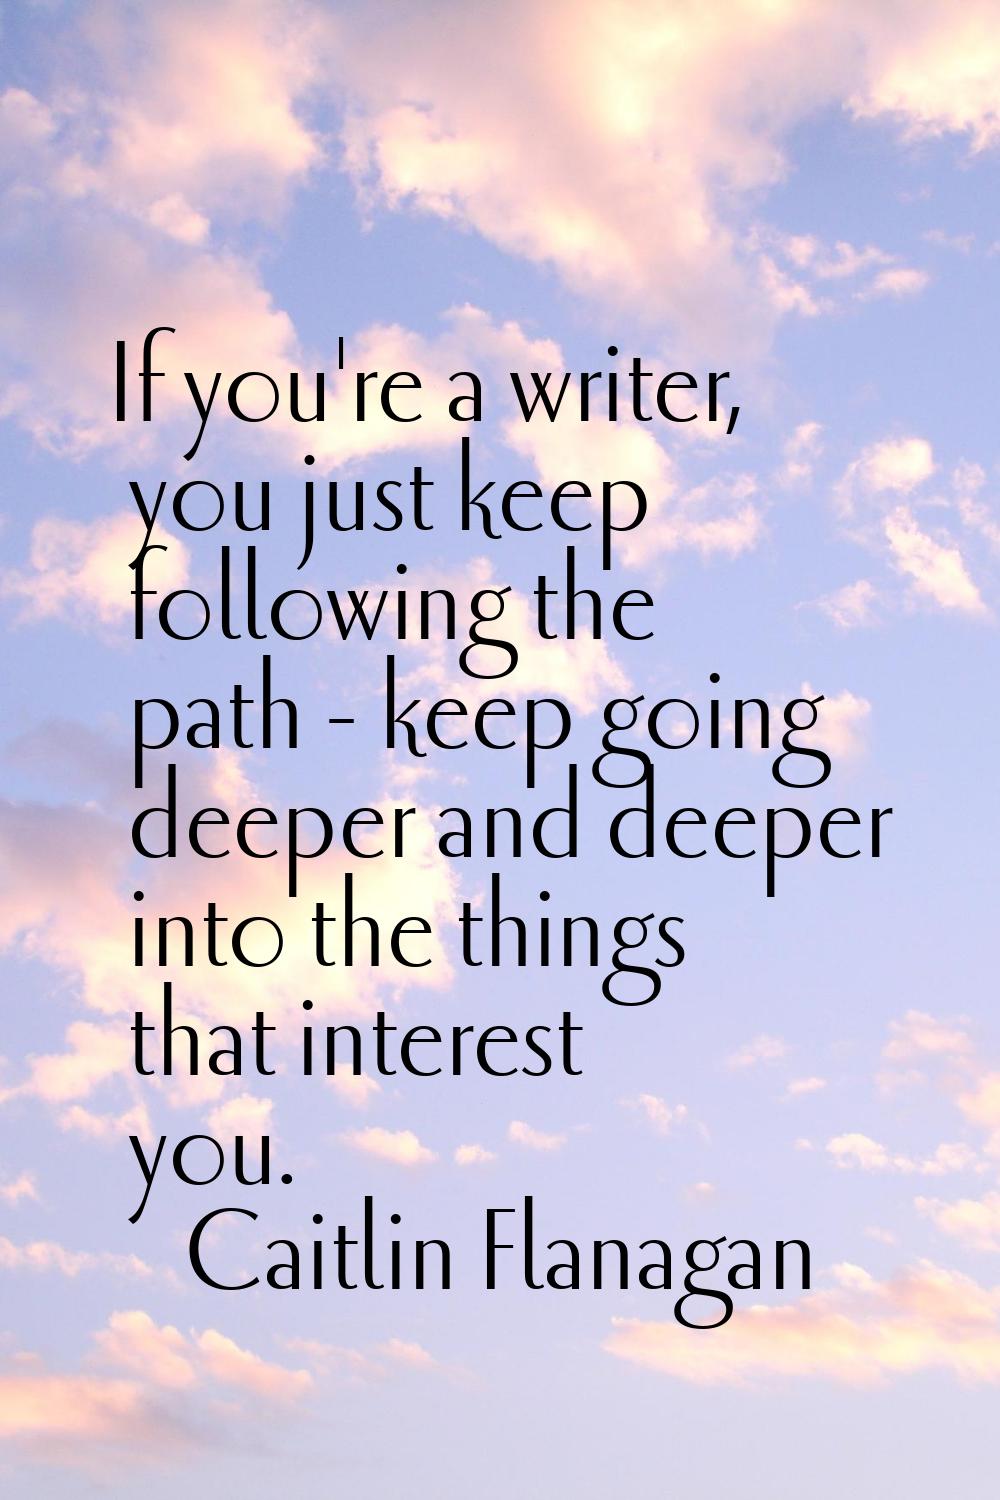 If you're a writer, you just keep following the path - keep going deeper and deeper into the things